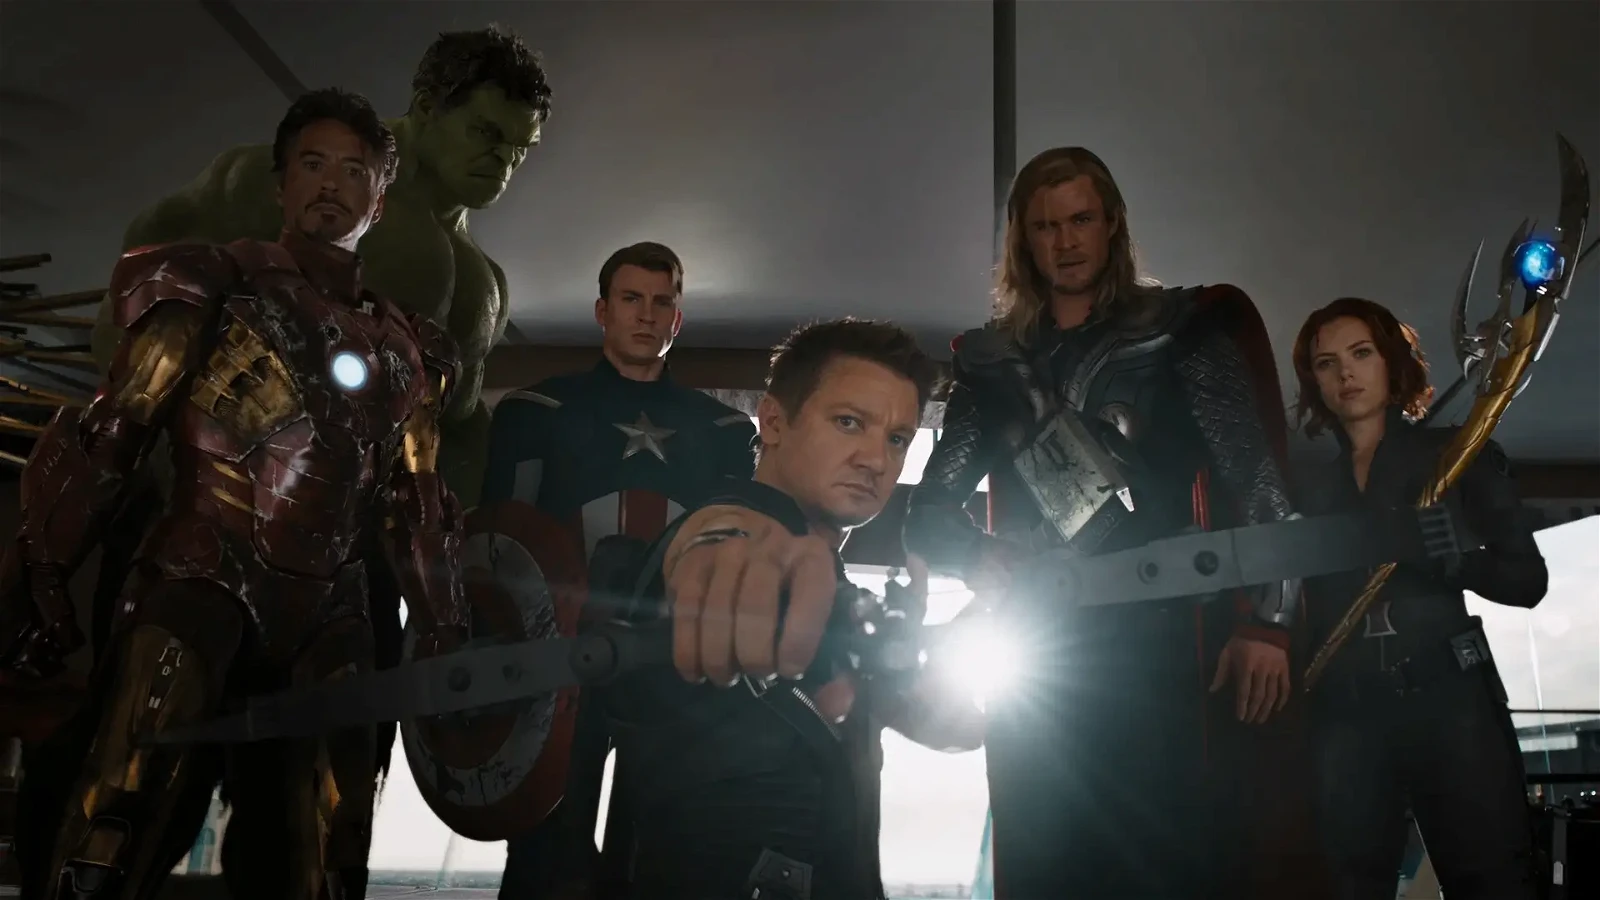 The original six superheroes from The Avengers (2012)